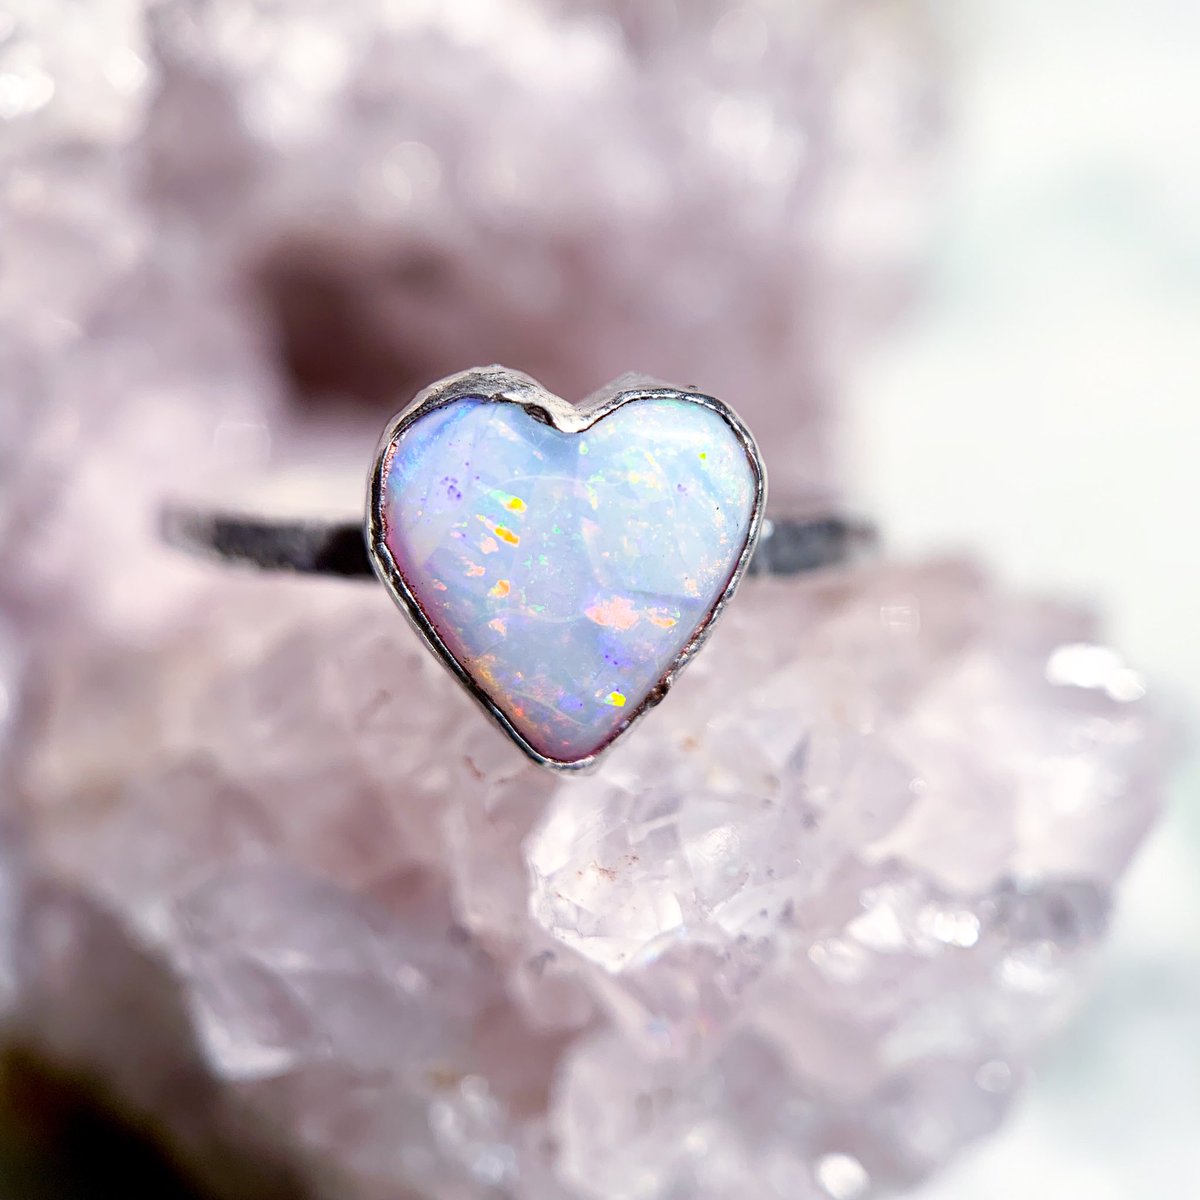 should i make more opal hearts before vday ??! 🥰💋
what’s your size? ♡